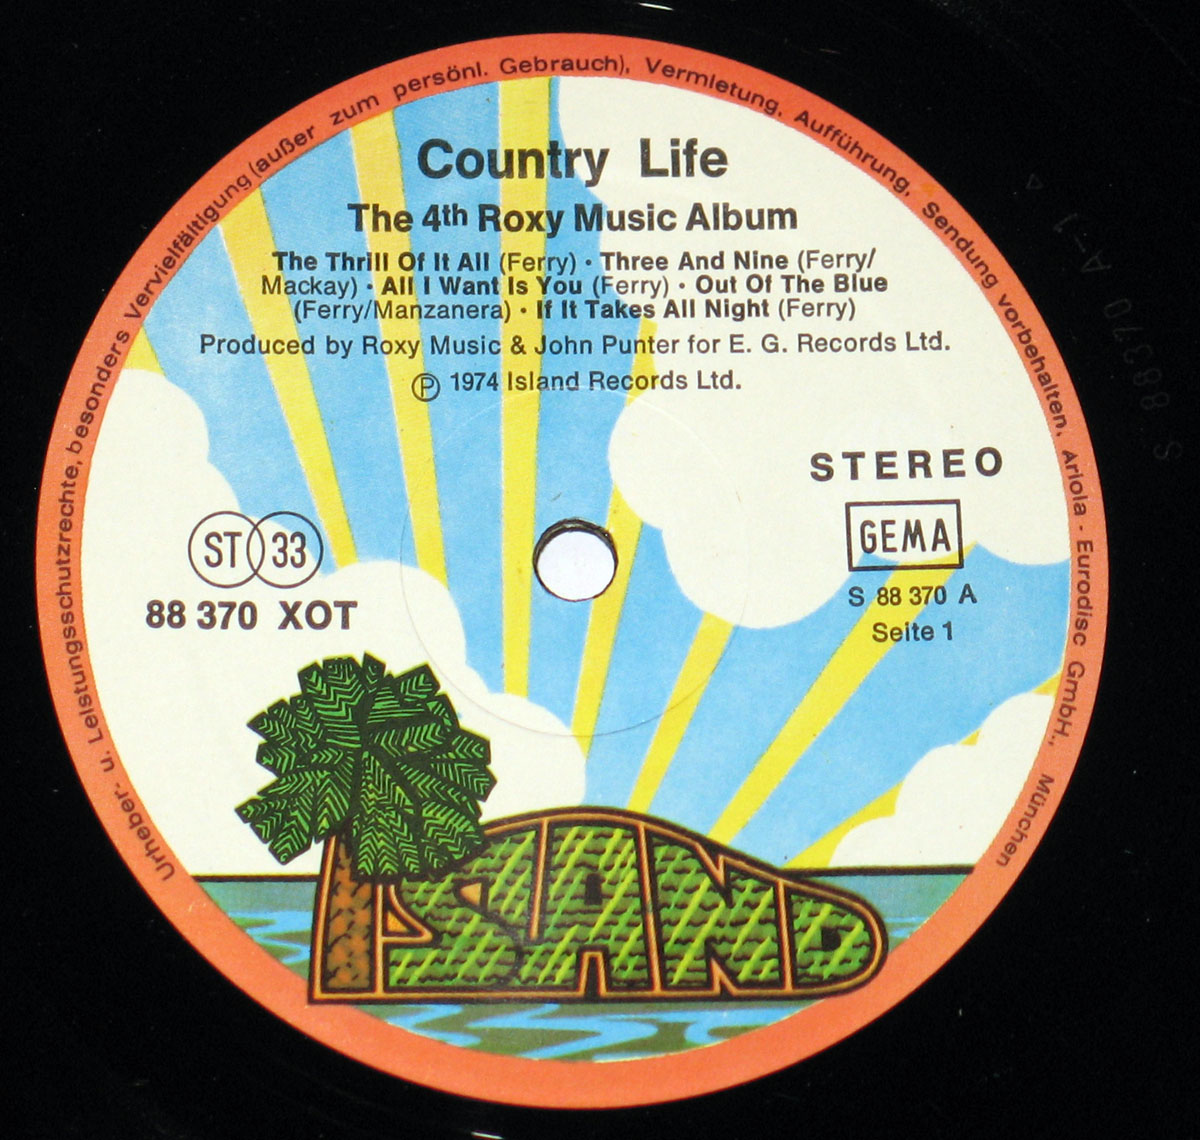 High Resolution Photo roxy music country life 